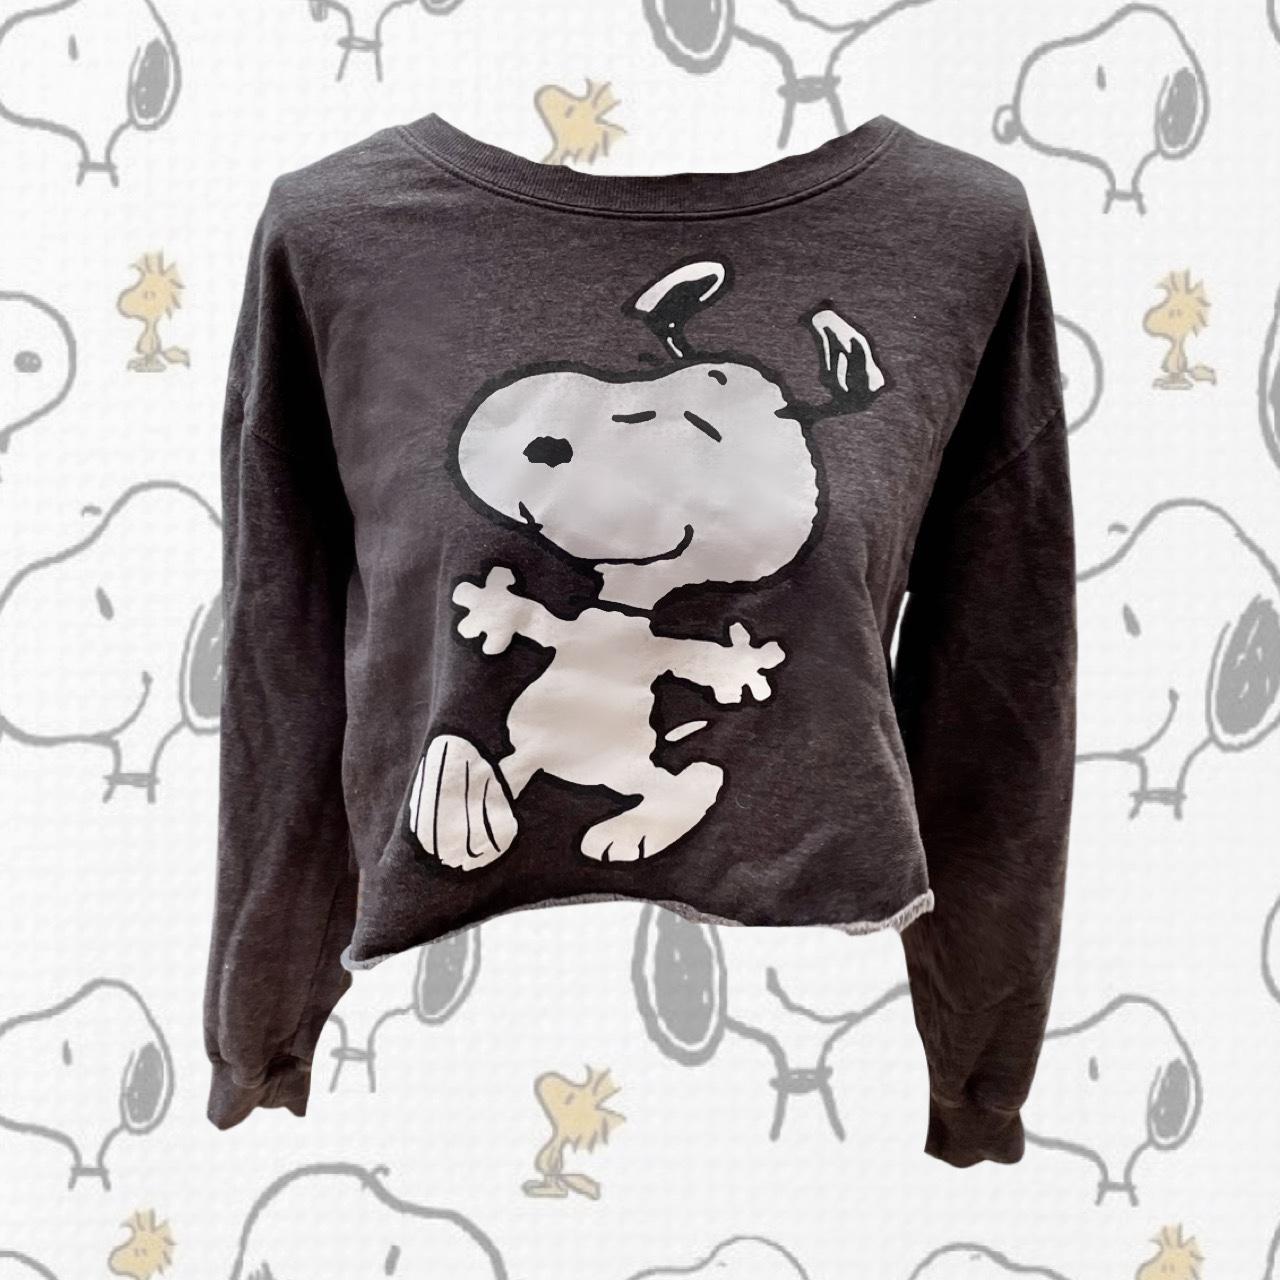 Snoopy cropped sweater🐾 Will fit a UK 8-10... - Depop